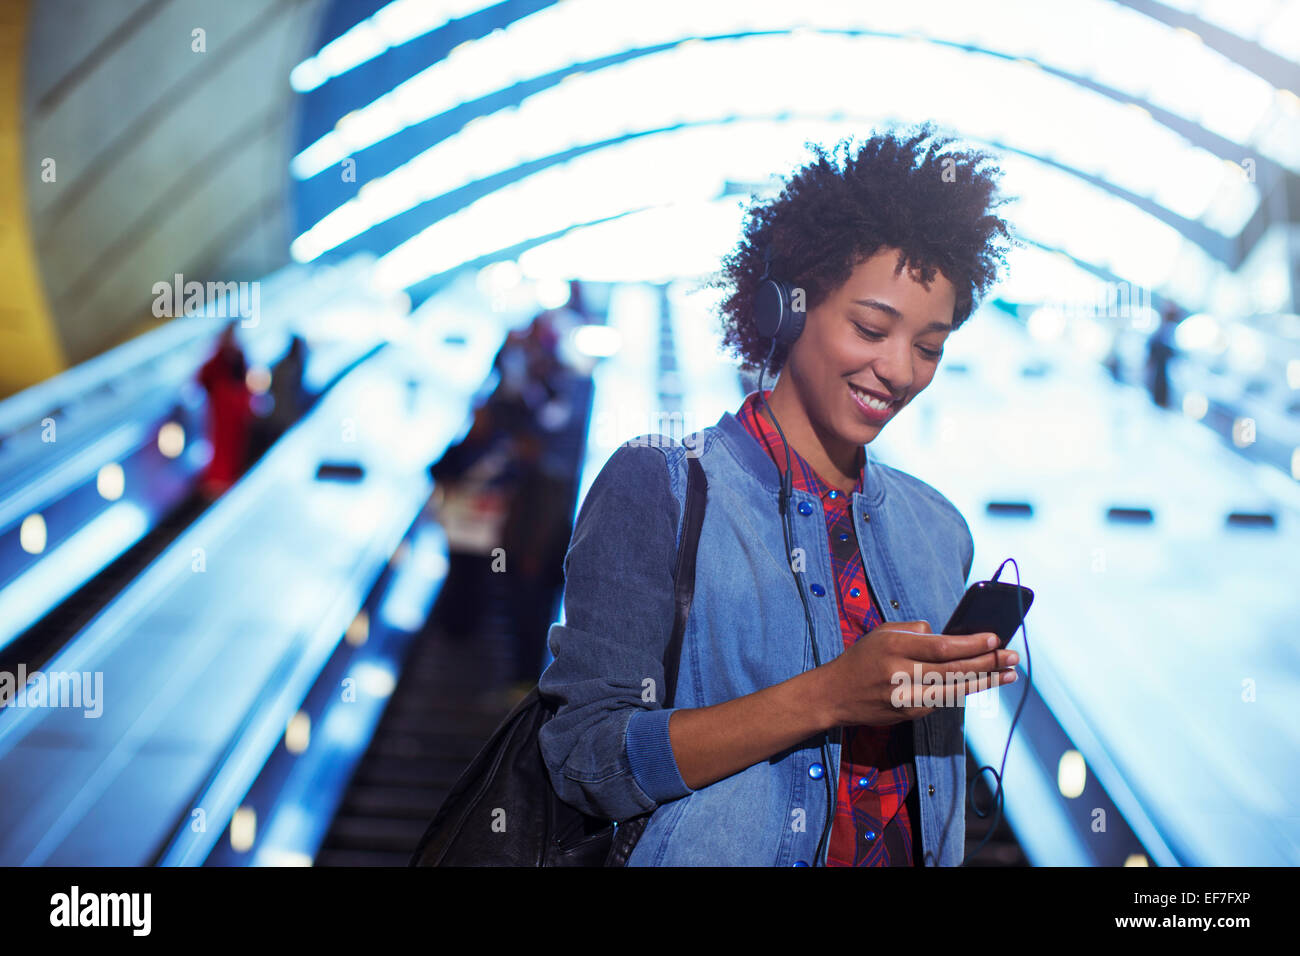 Smiling woman listening to mp3 player on escalator Stock Photo